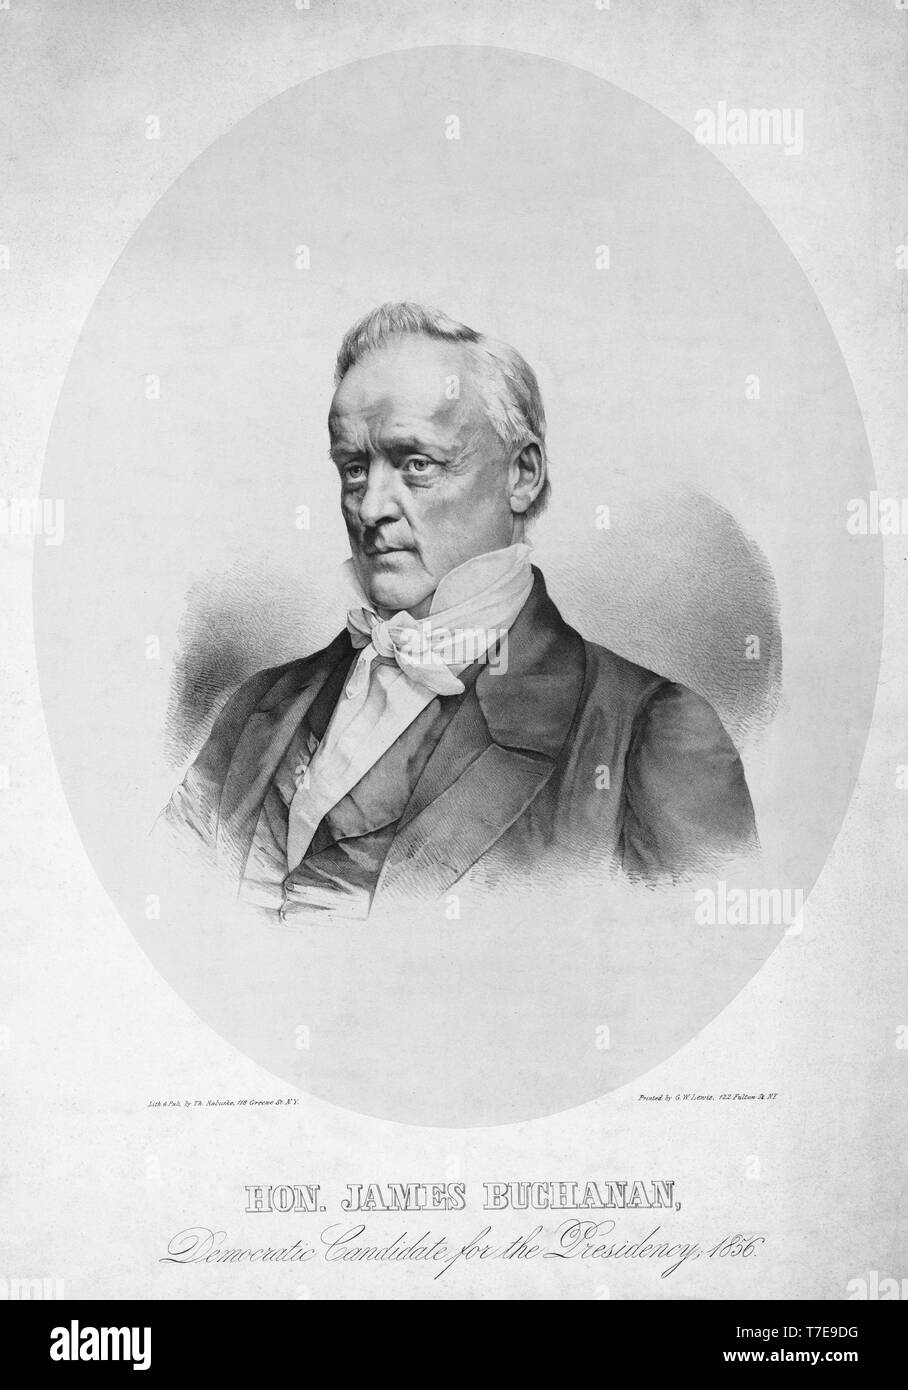 Hon. James Buchanan, Democratic Candidate for the Presidency, Lithograph & Published by Thomas Rabuske, N.Y., 1856 Stock Photo